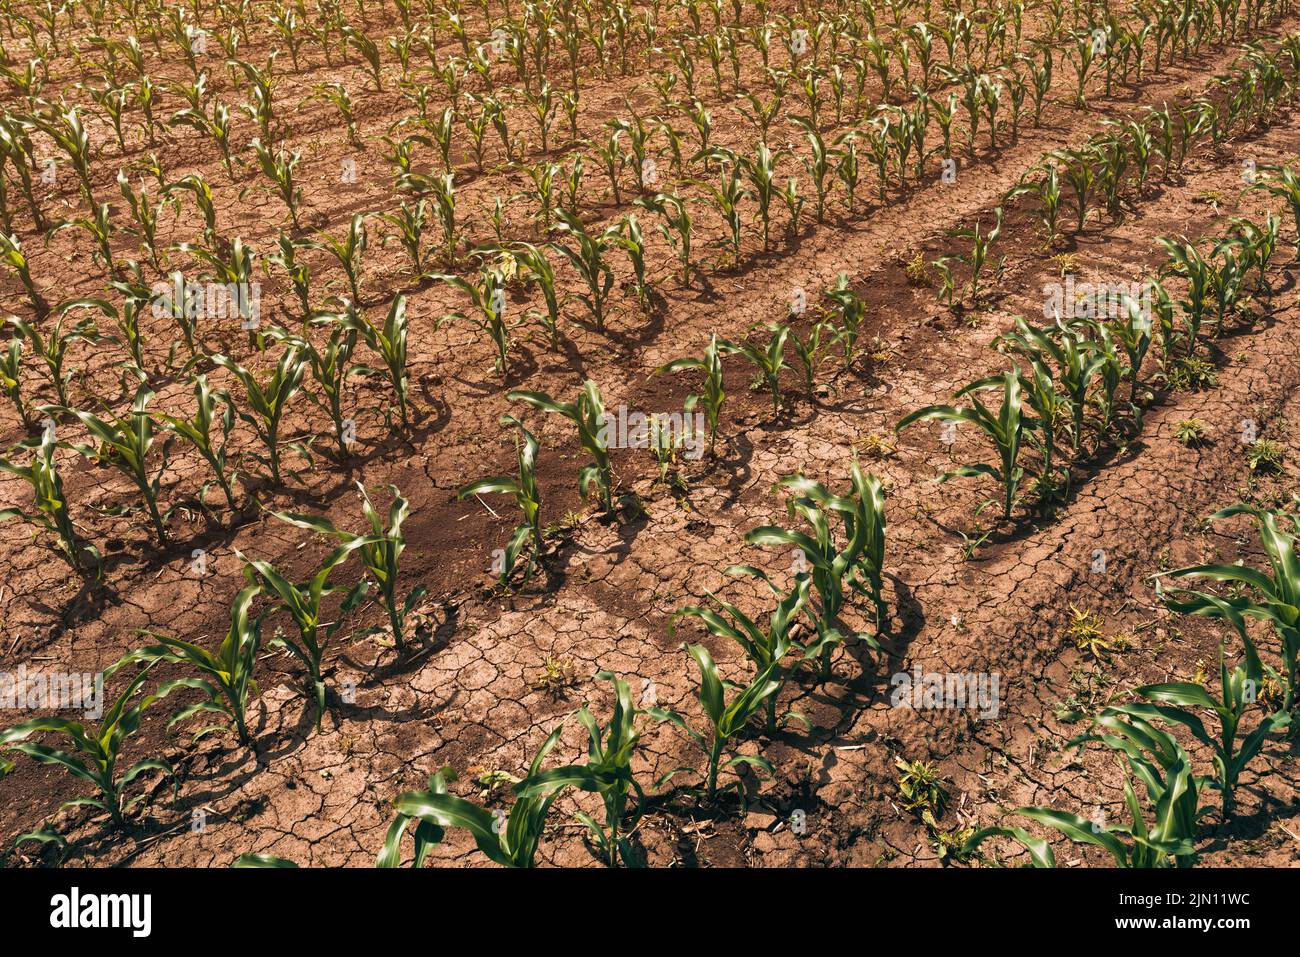 Zea mays plantation, corn sprouts in cultivated agricultural field, selective focus Stock Photo